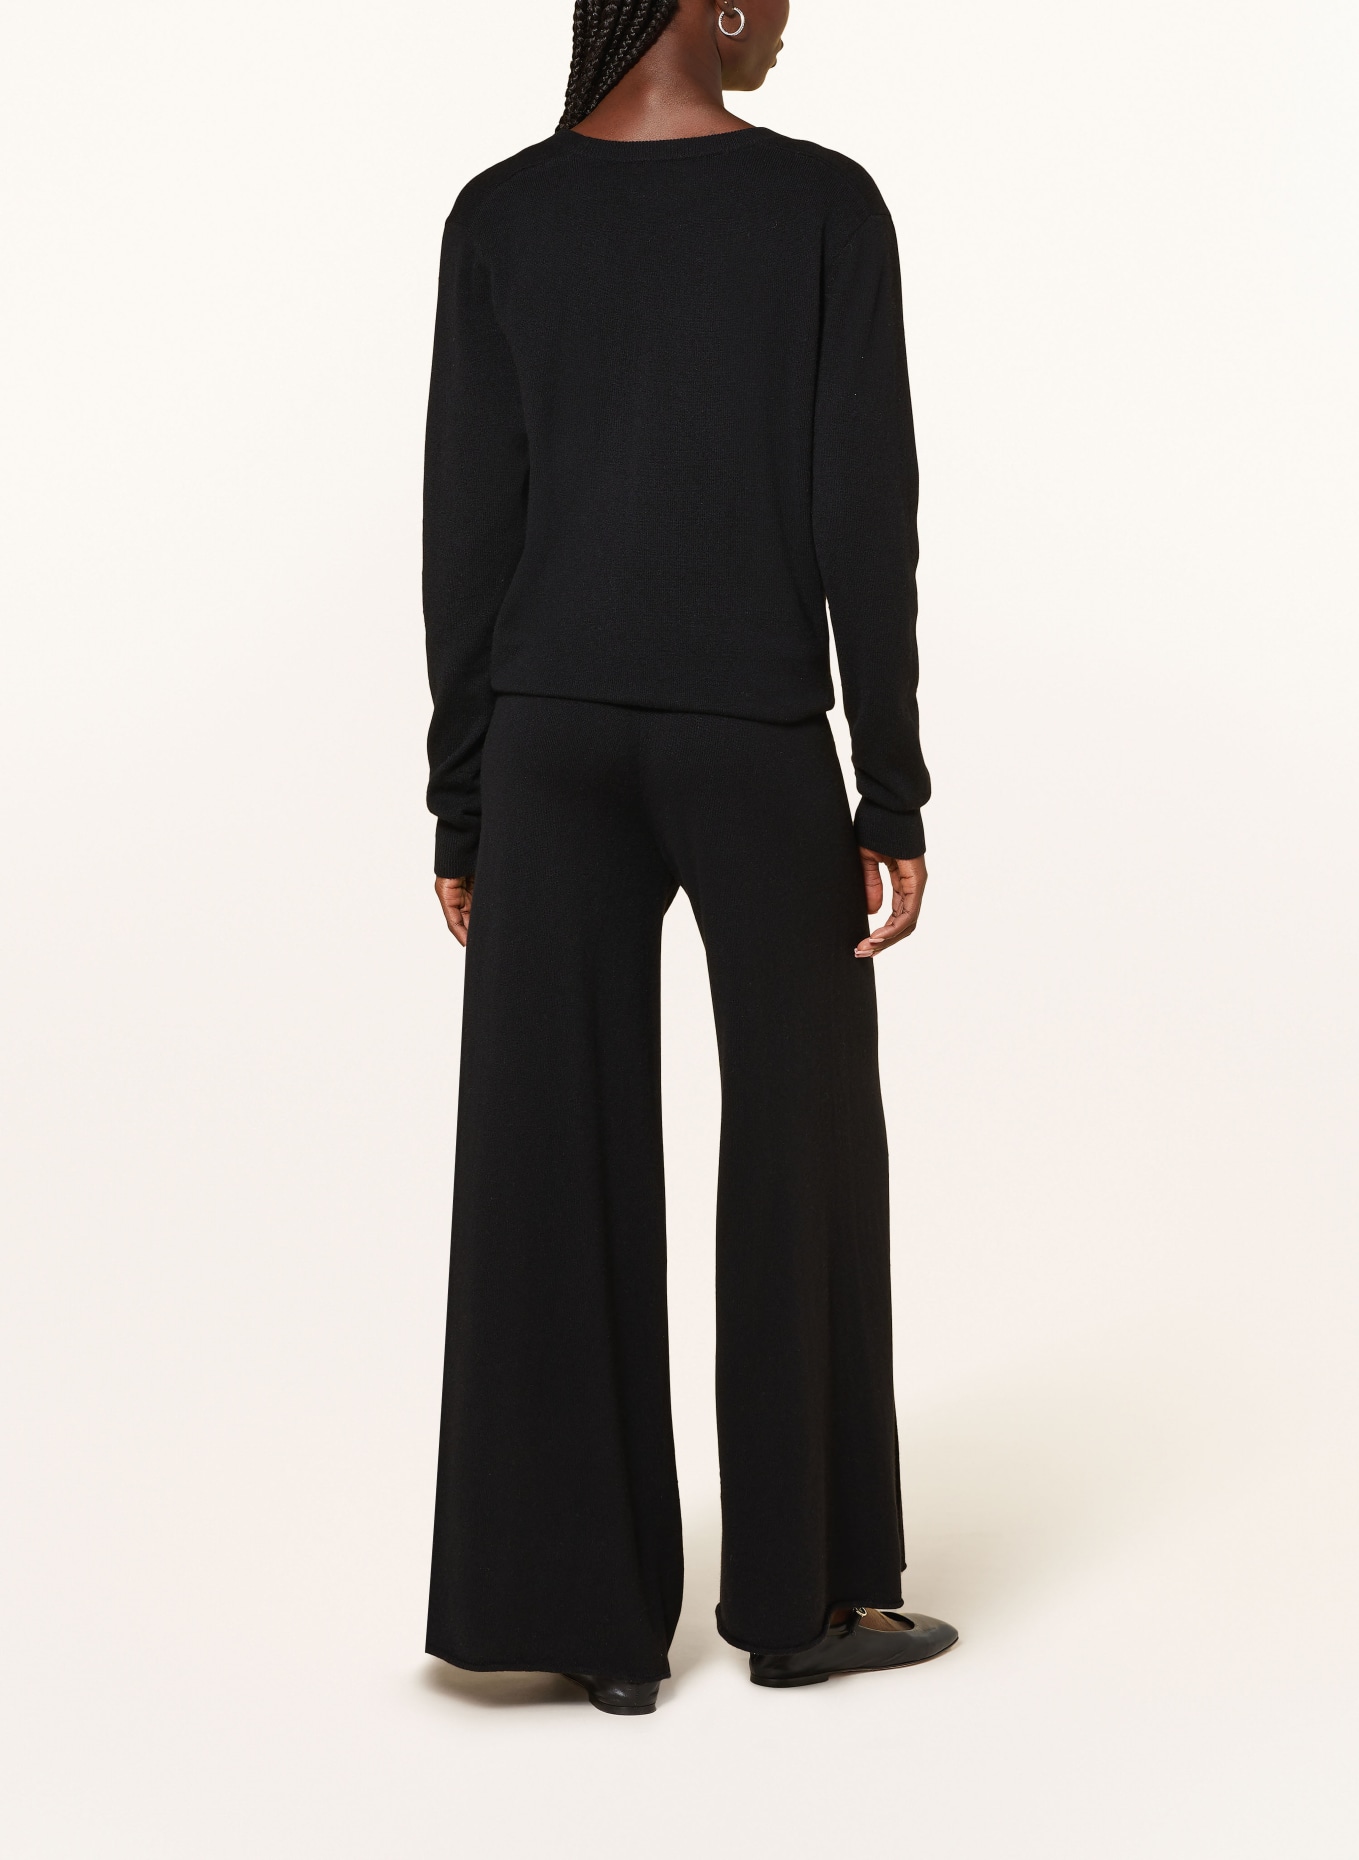 LISA YANG Knit trousers ILARIA in cashmere, Color: BLACK (Image 3)